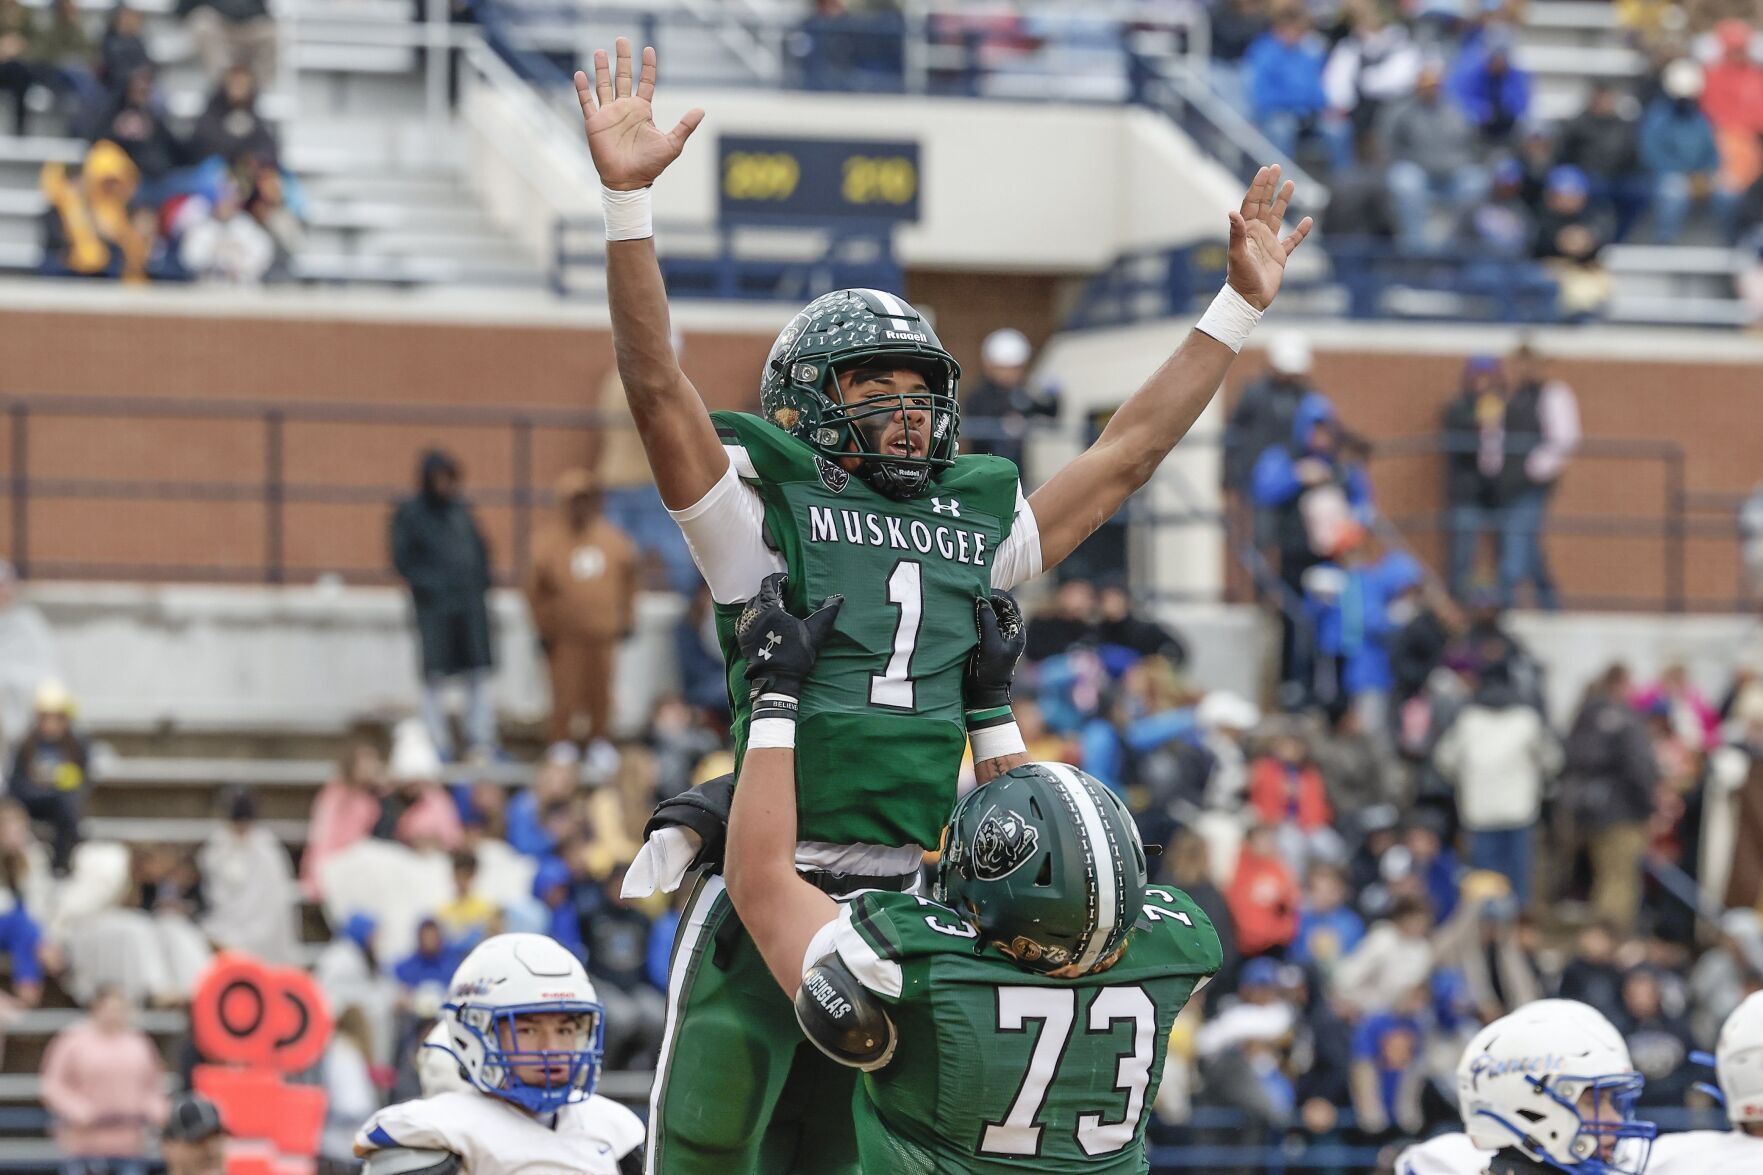 Muskogee Roughers Win First Gold Ball Since 1986, Avenging Week 10 Loss to Stillwater Pioneers